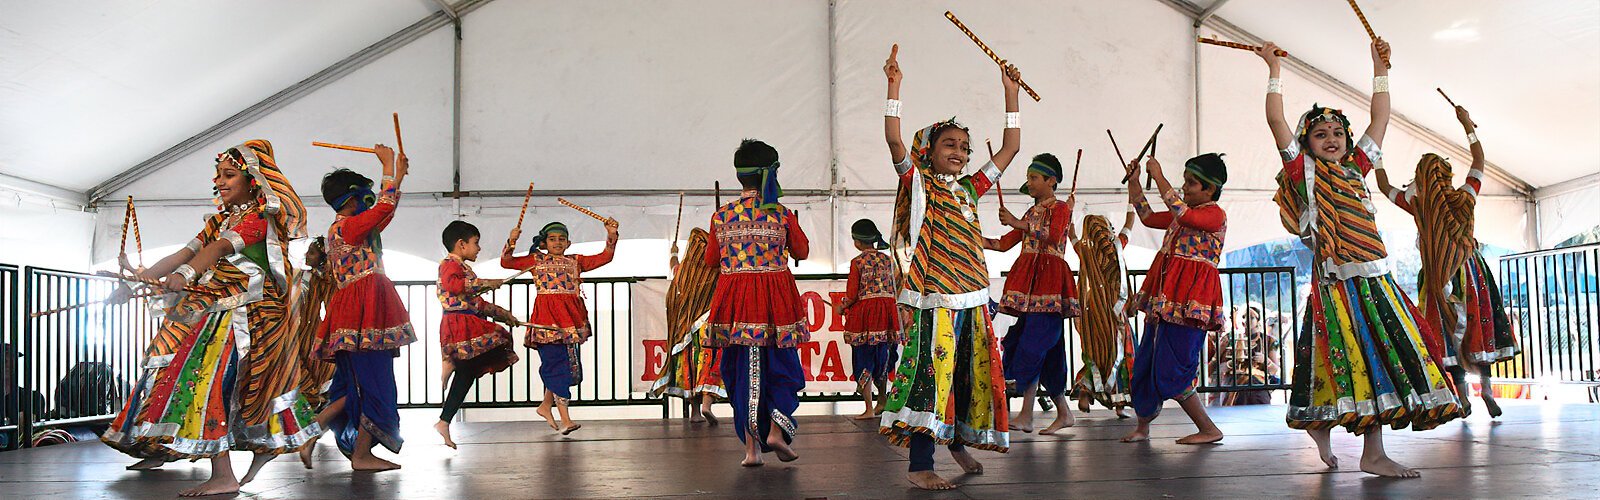  Young Indian dancers perform a dance from the state of Gujarat in India during SPIFFS 47th annual International Folk Fair.